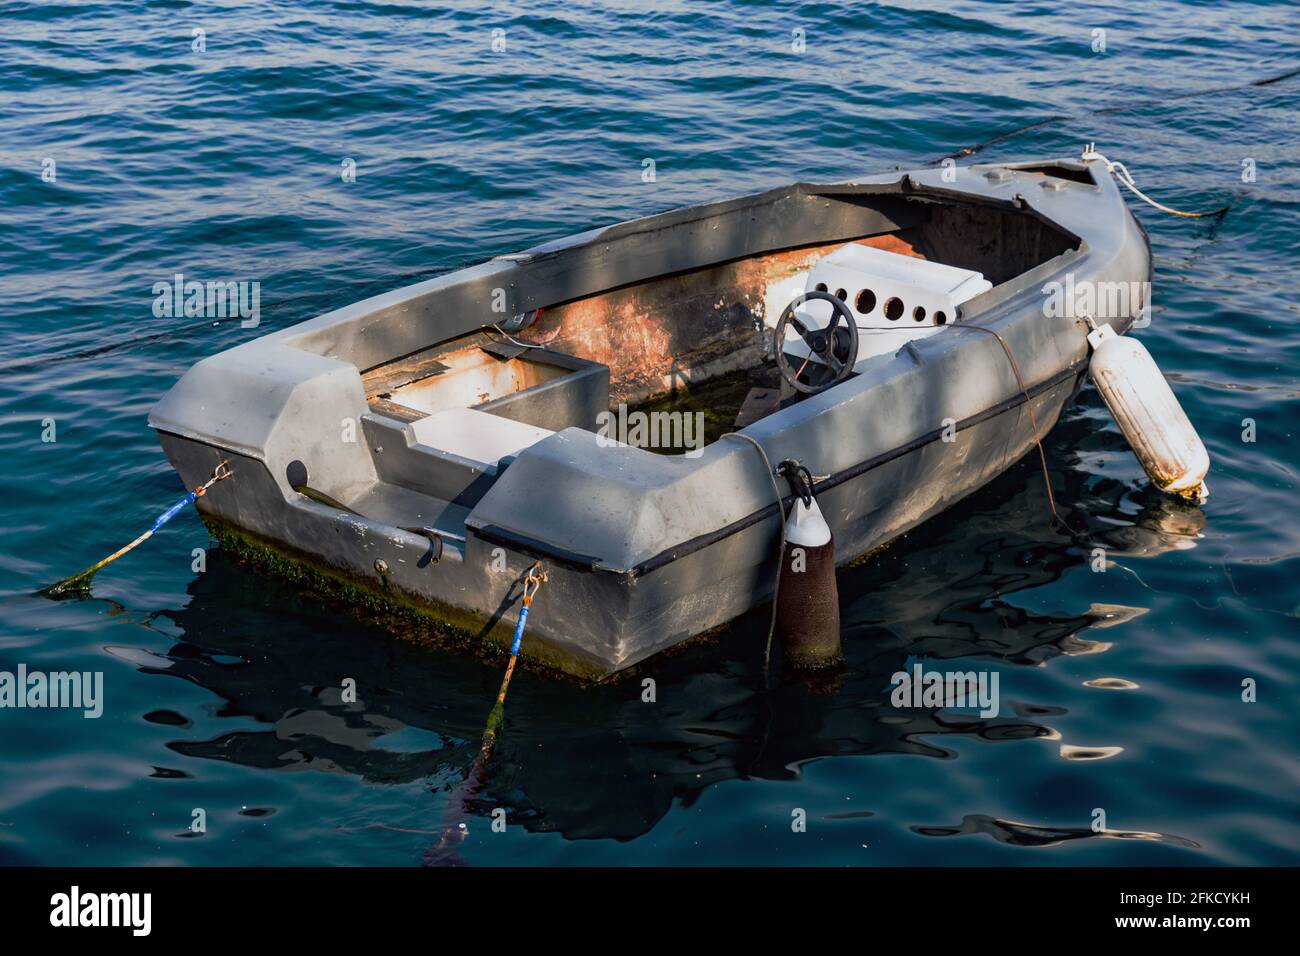 Abandoned fiberglass boat with no motor or rotor, anchored at sea, with shadows and sunlight. Stock Photo